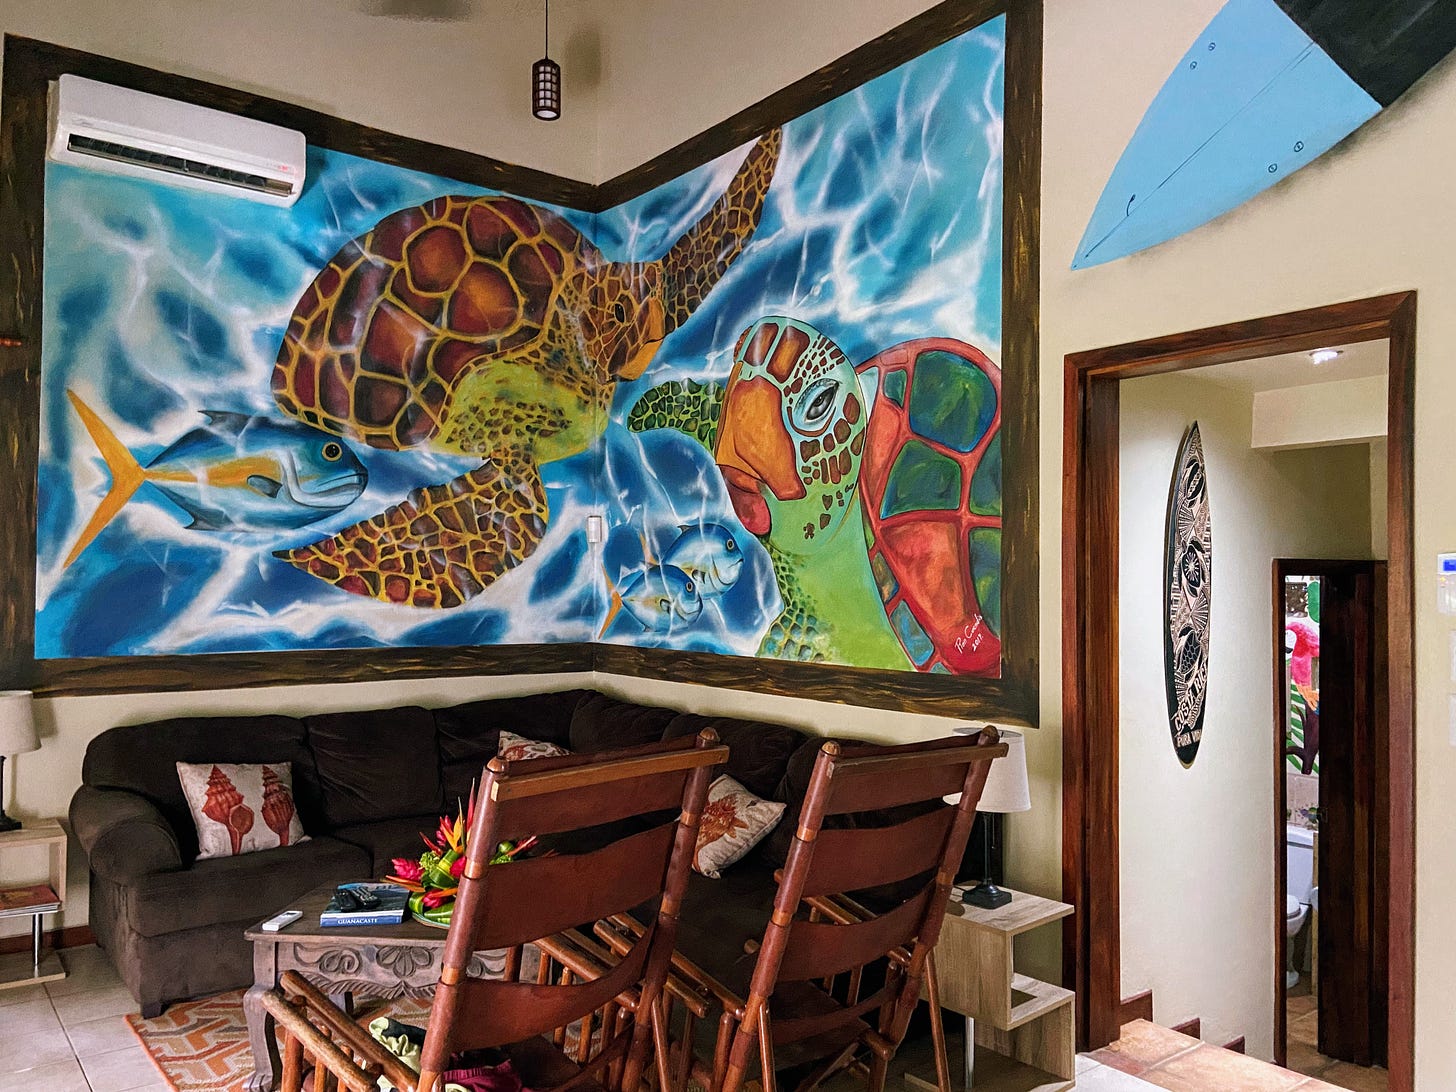 Room with large wall mural of sea turtles and fish